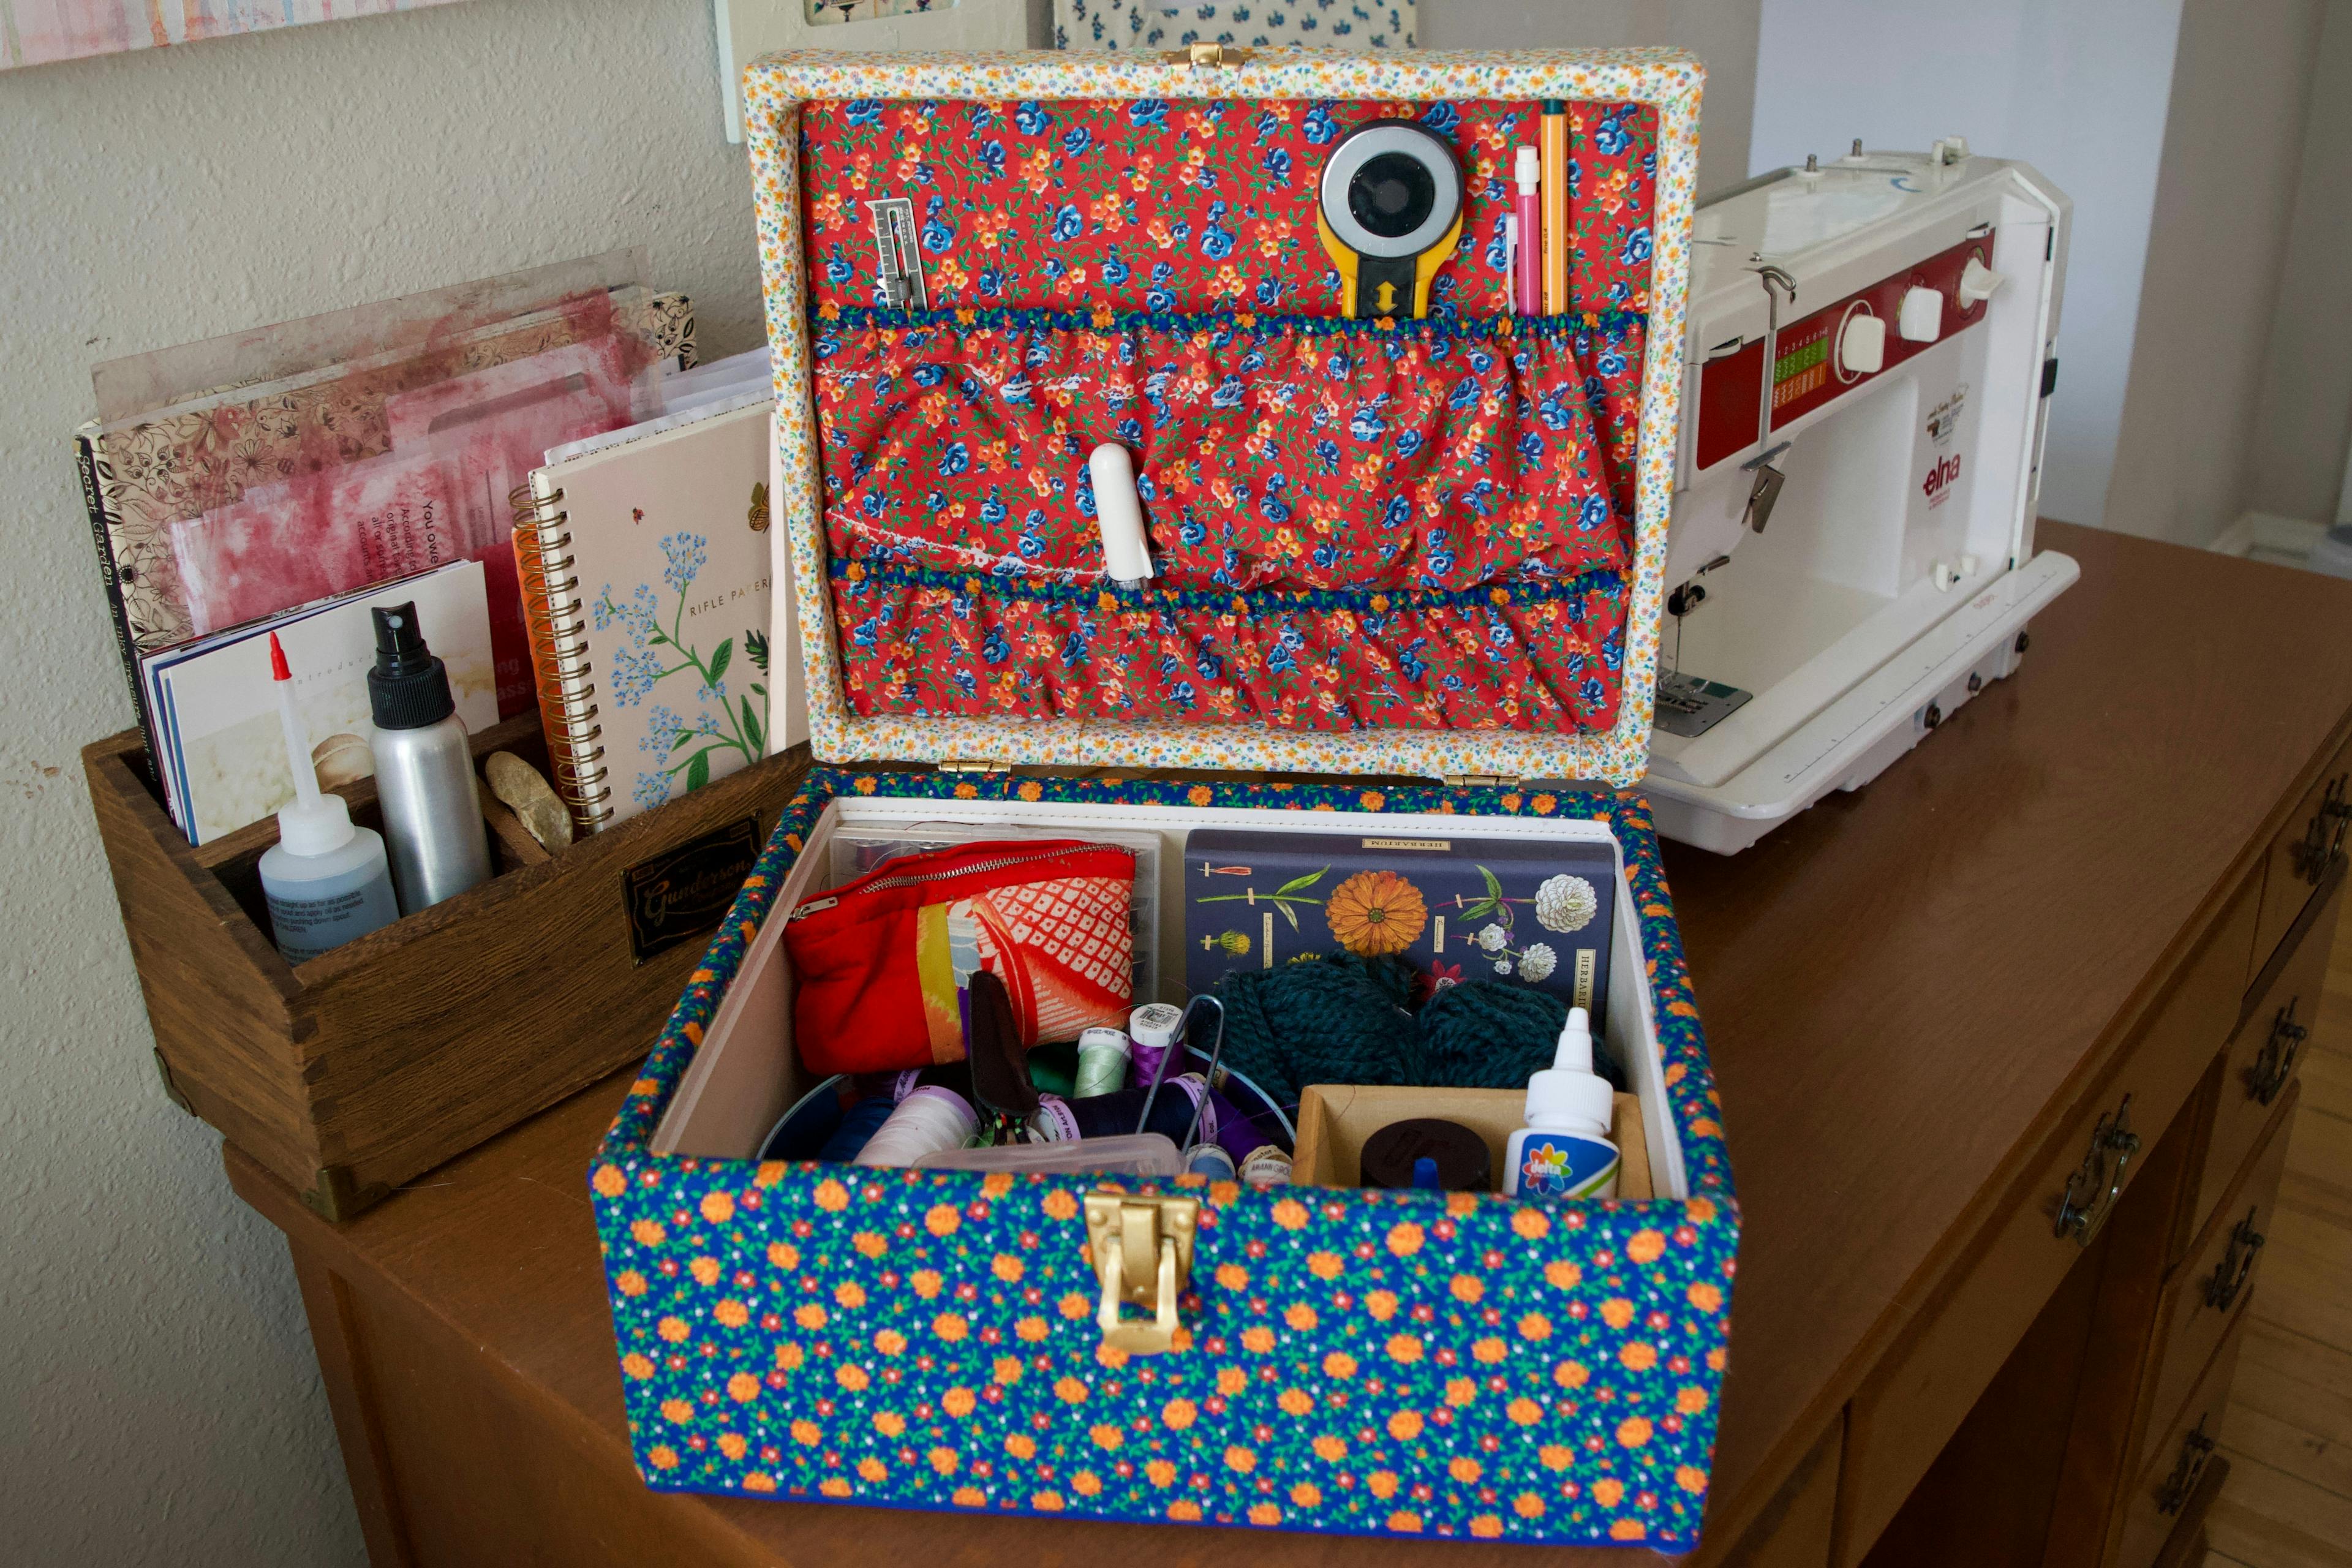 A sewing box sitting open showing its contents. The box is on a sewing table with a sewing machine and wooden containers of stationary and other crafting supplies.